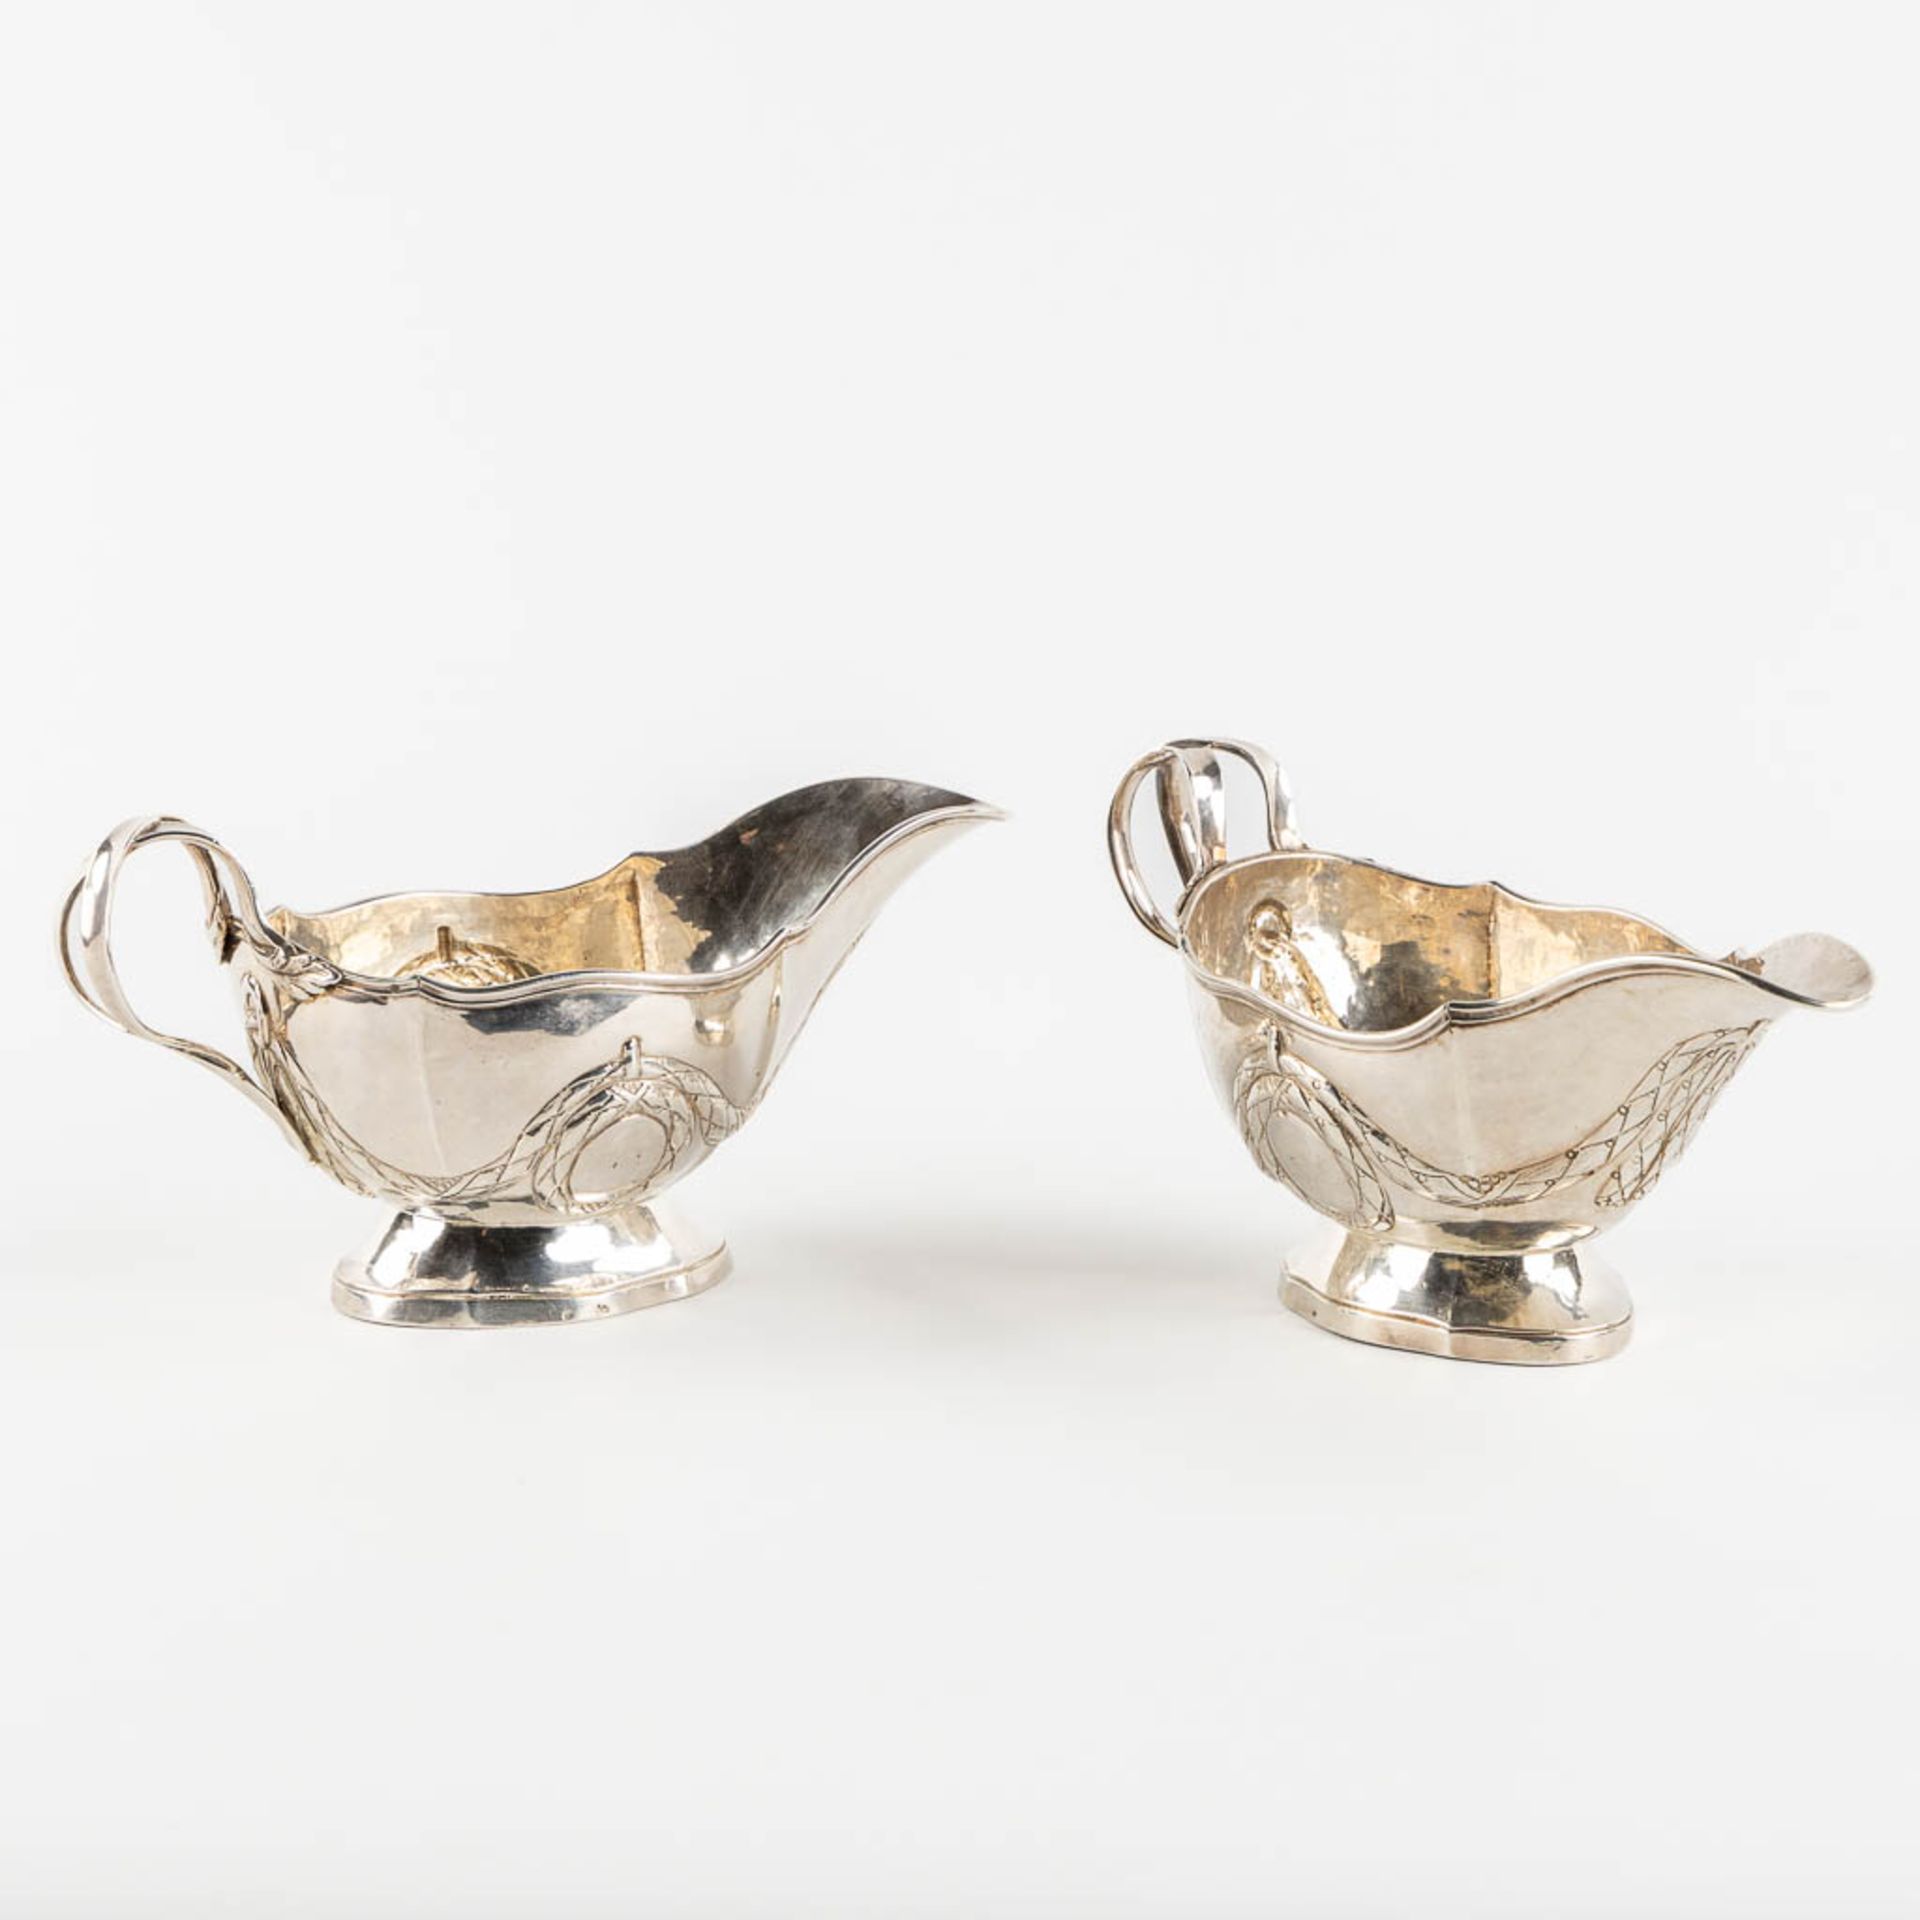 A pair of saucers, silver, Louis XVI. 'Master with the three nails, Brussels, 1781. 18th C. (L:9,5 x